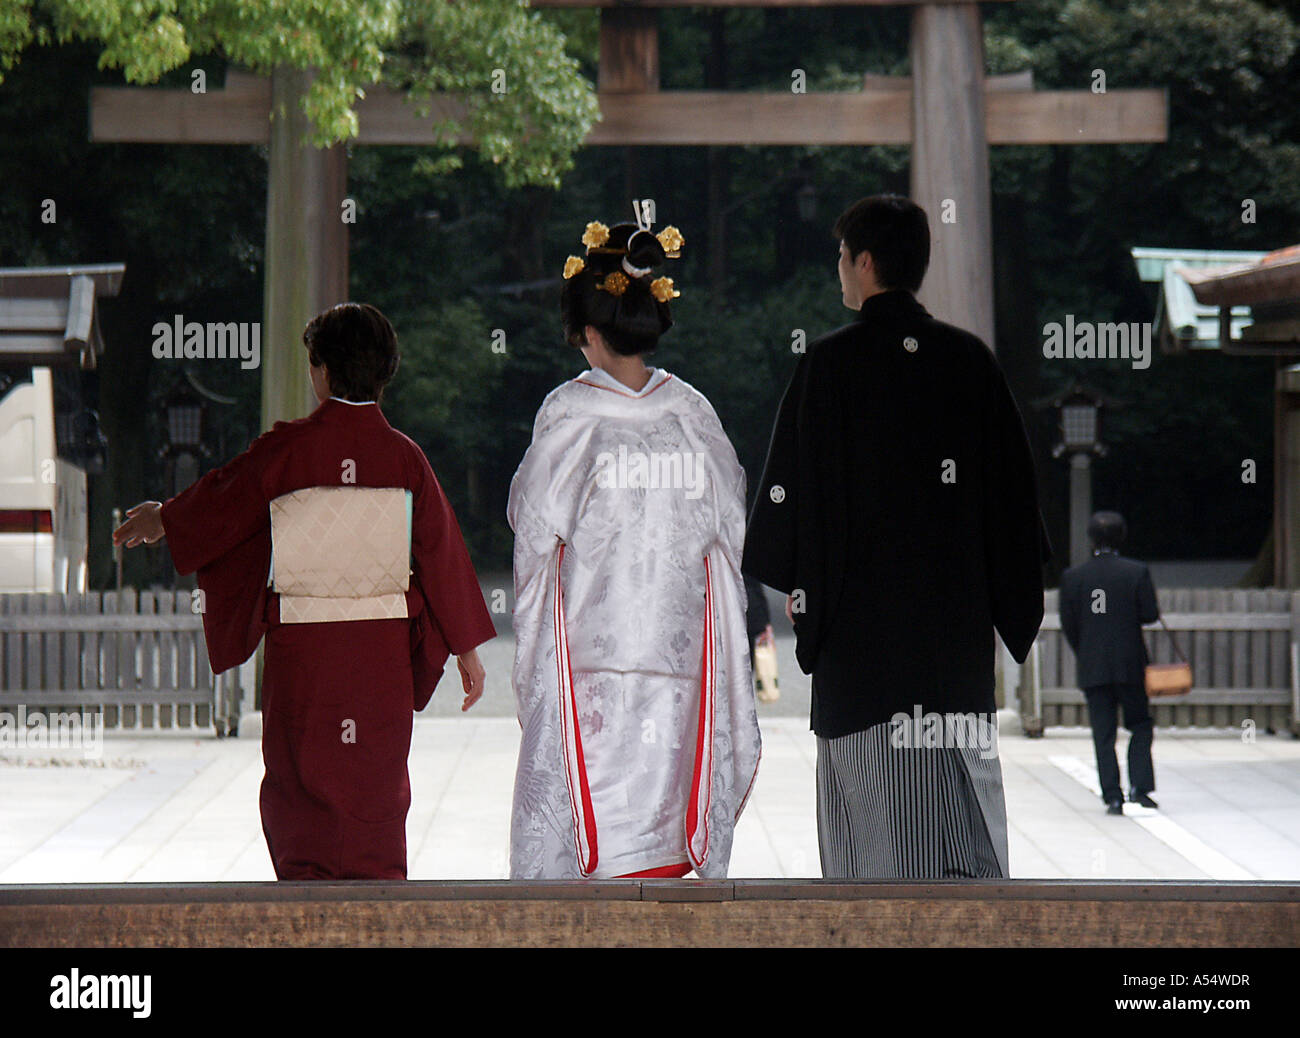 Painet ip2012 japan newlyweds meiji templee tokyo 2003 country developing nation less economically developed culture Stock Photo